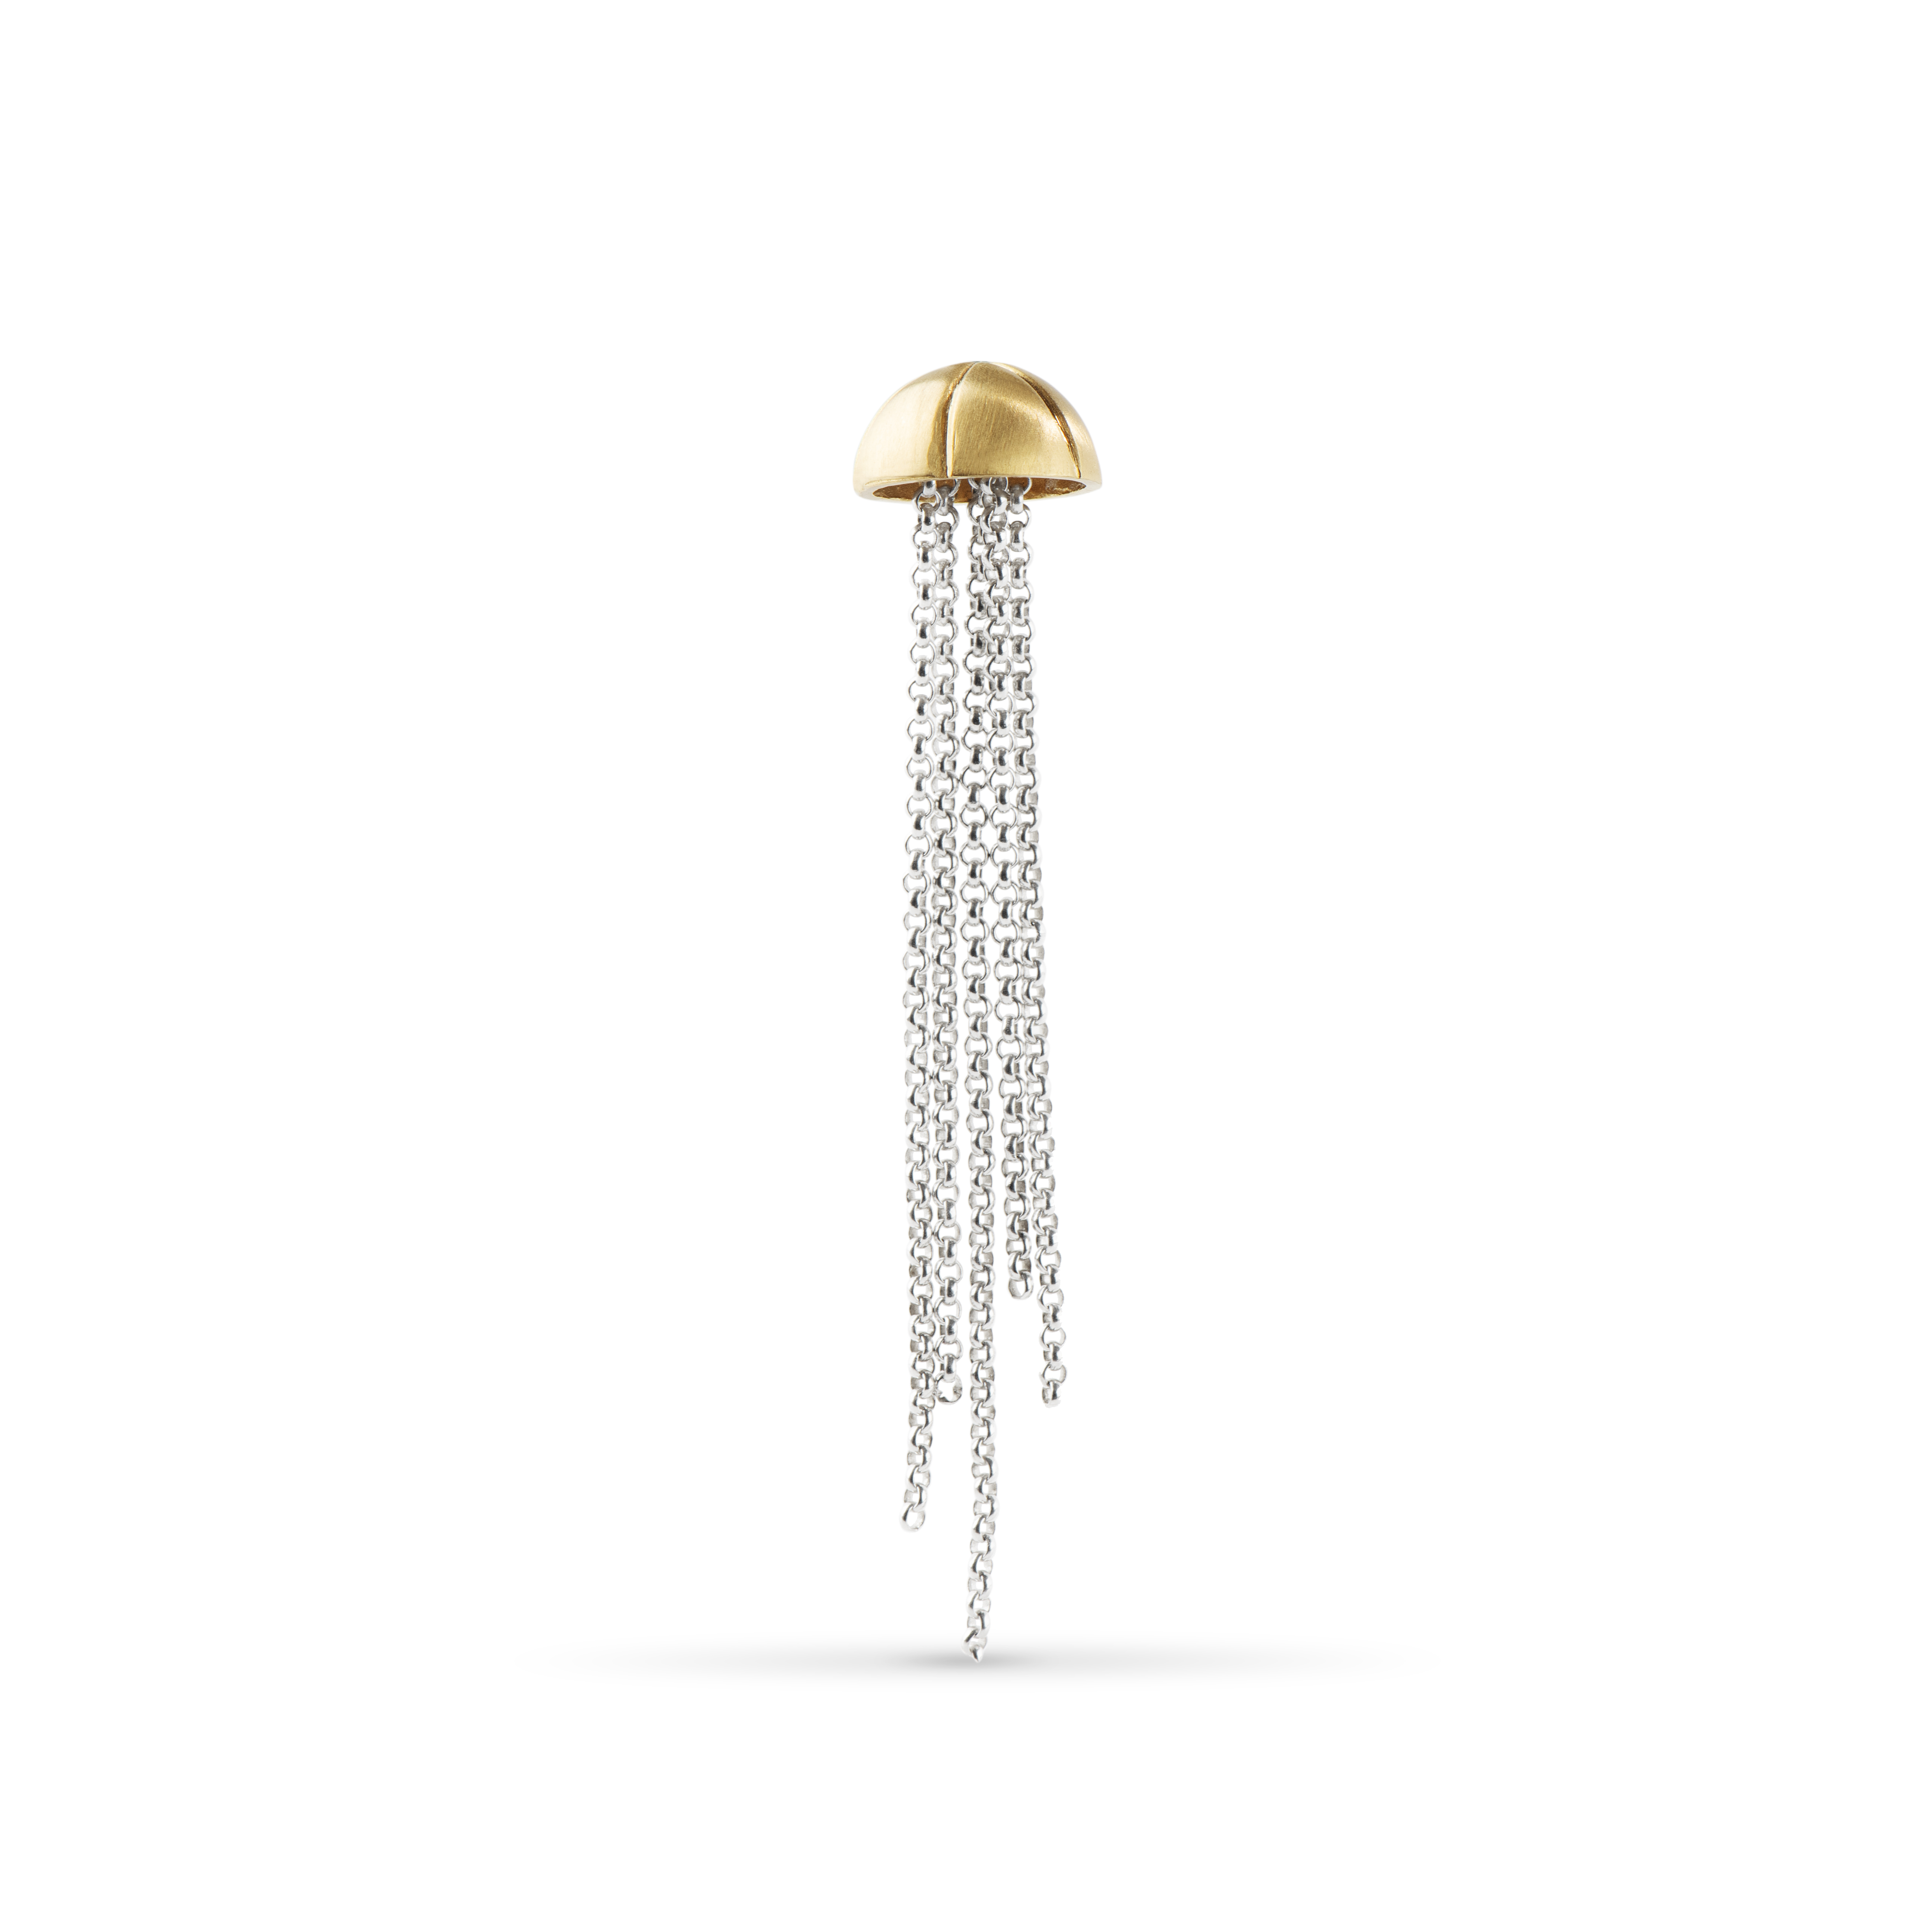 Jellyfish Earring - Silver and Gold - Image 3